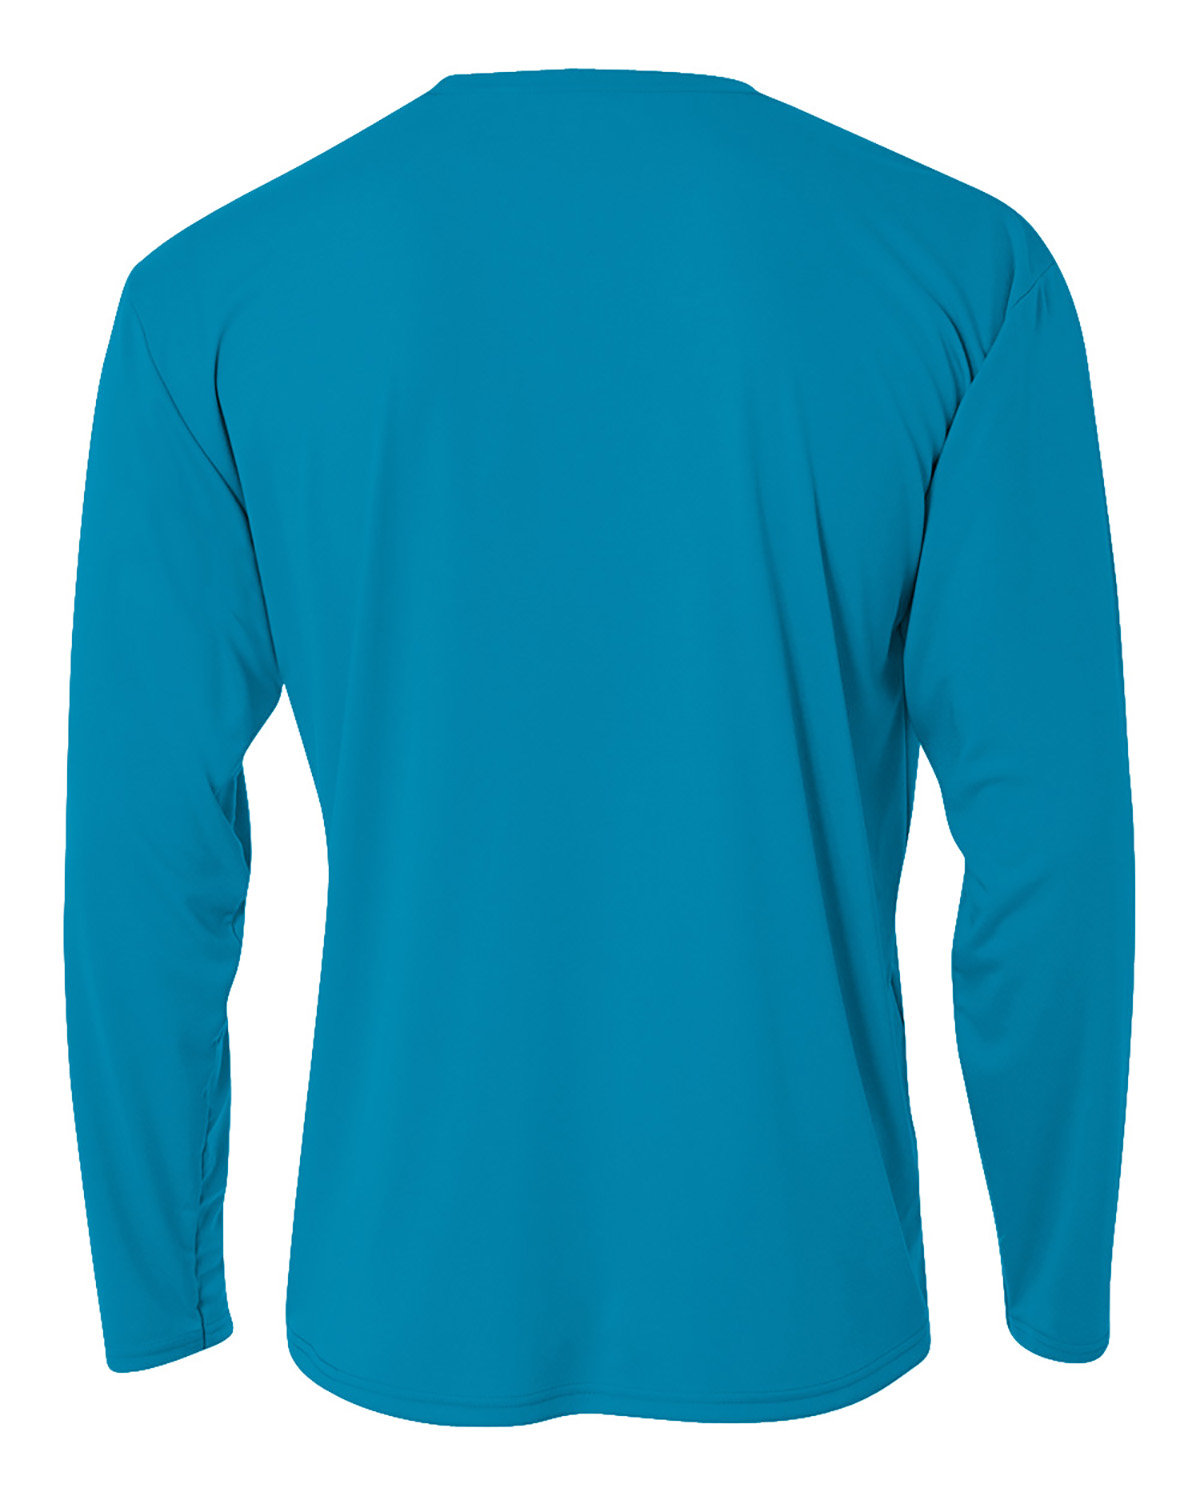 A4 Men's Cooling Performance Long Sleeve T-Shirt | Generic Site - Priced